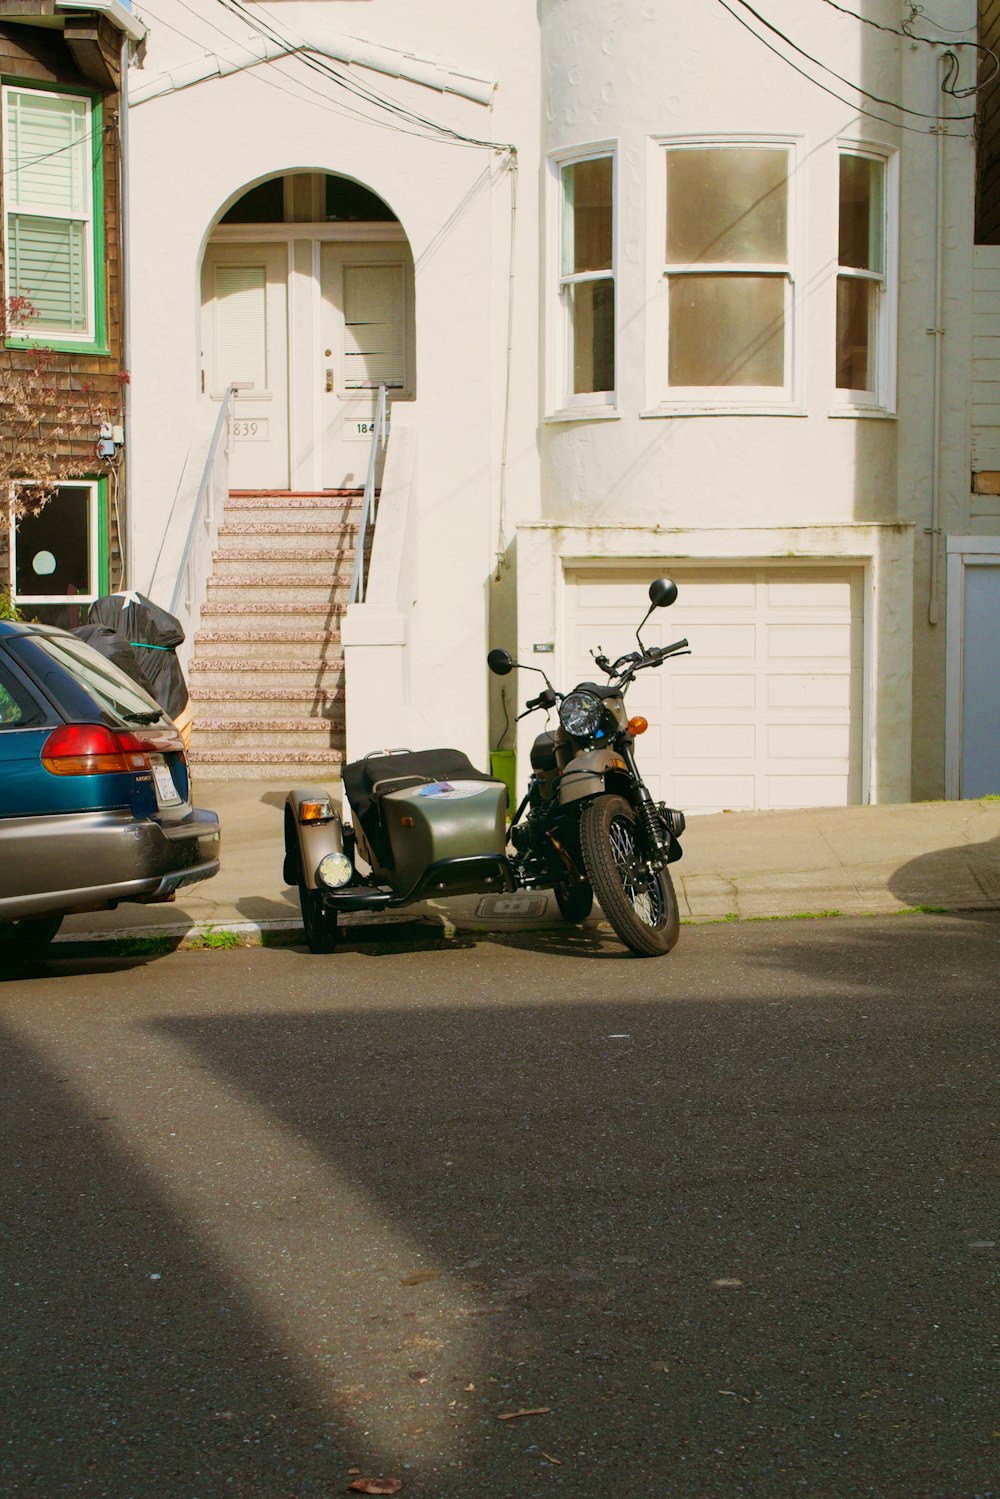 a motorcycle parked next to a car on a street